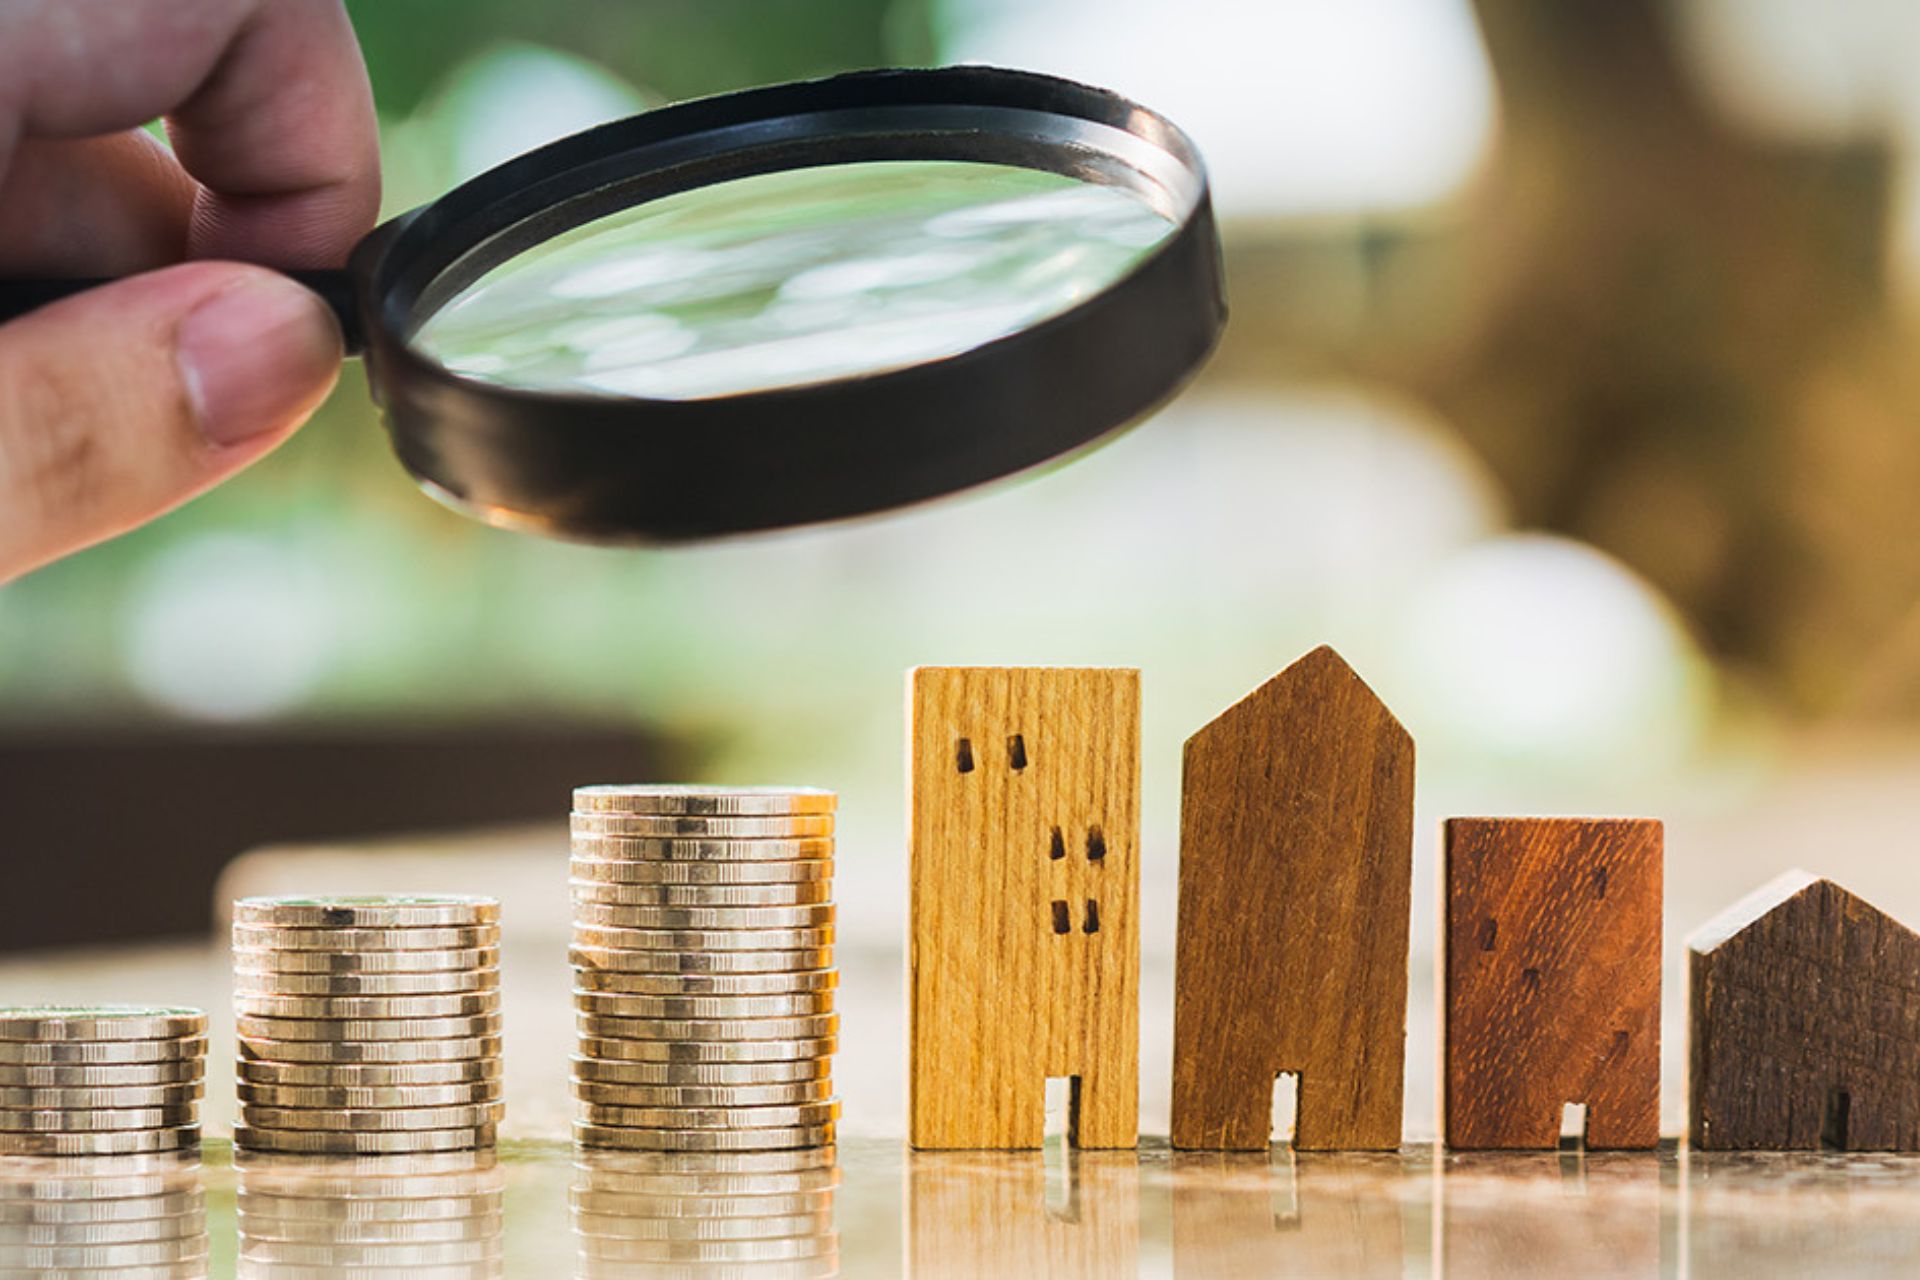 Magnifying glass over wooden building models and coins